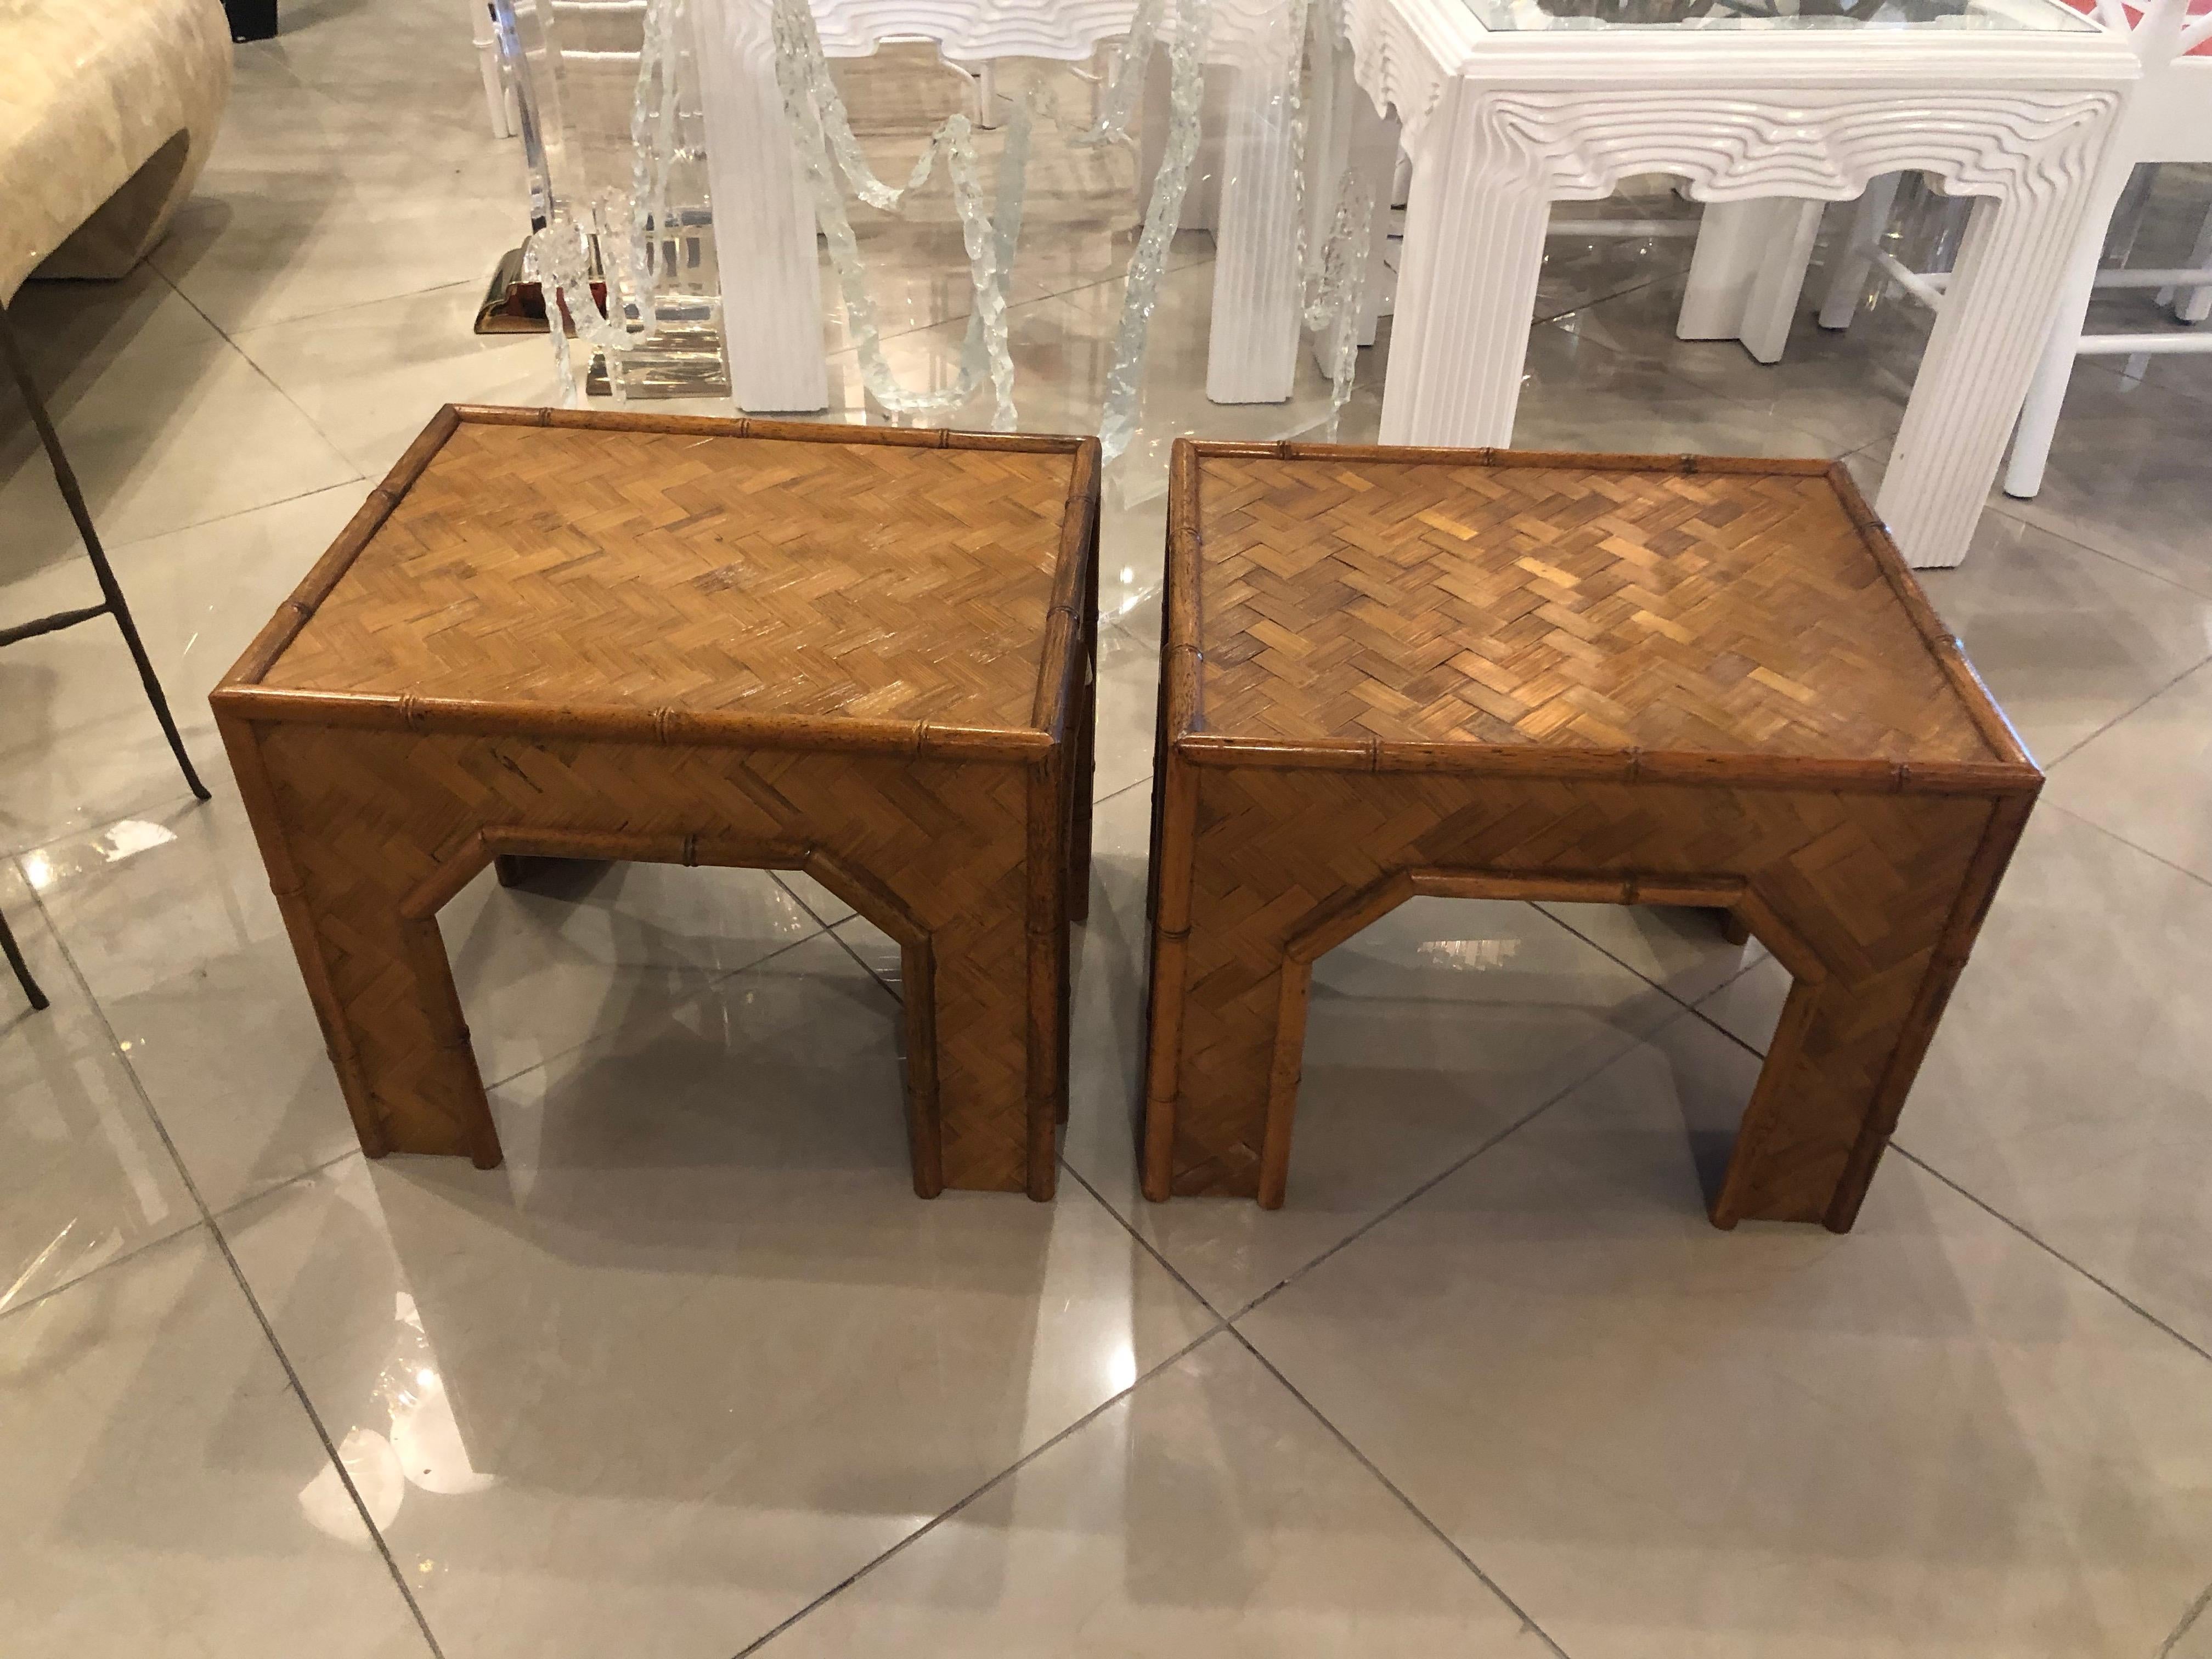 Vintage pair of woven rattan and bamboo benches, stools, tables. Can be used in a variety of ways. Moroccan details with the arched cut-outs. Matching console table will be listed separately.